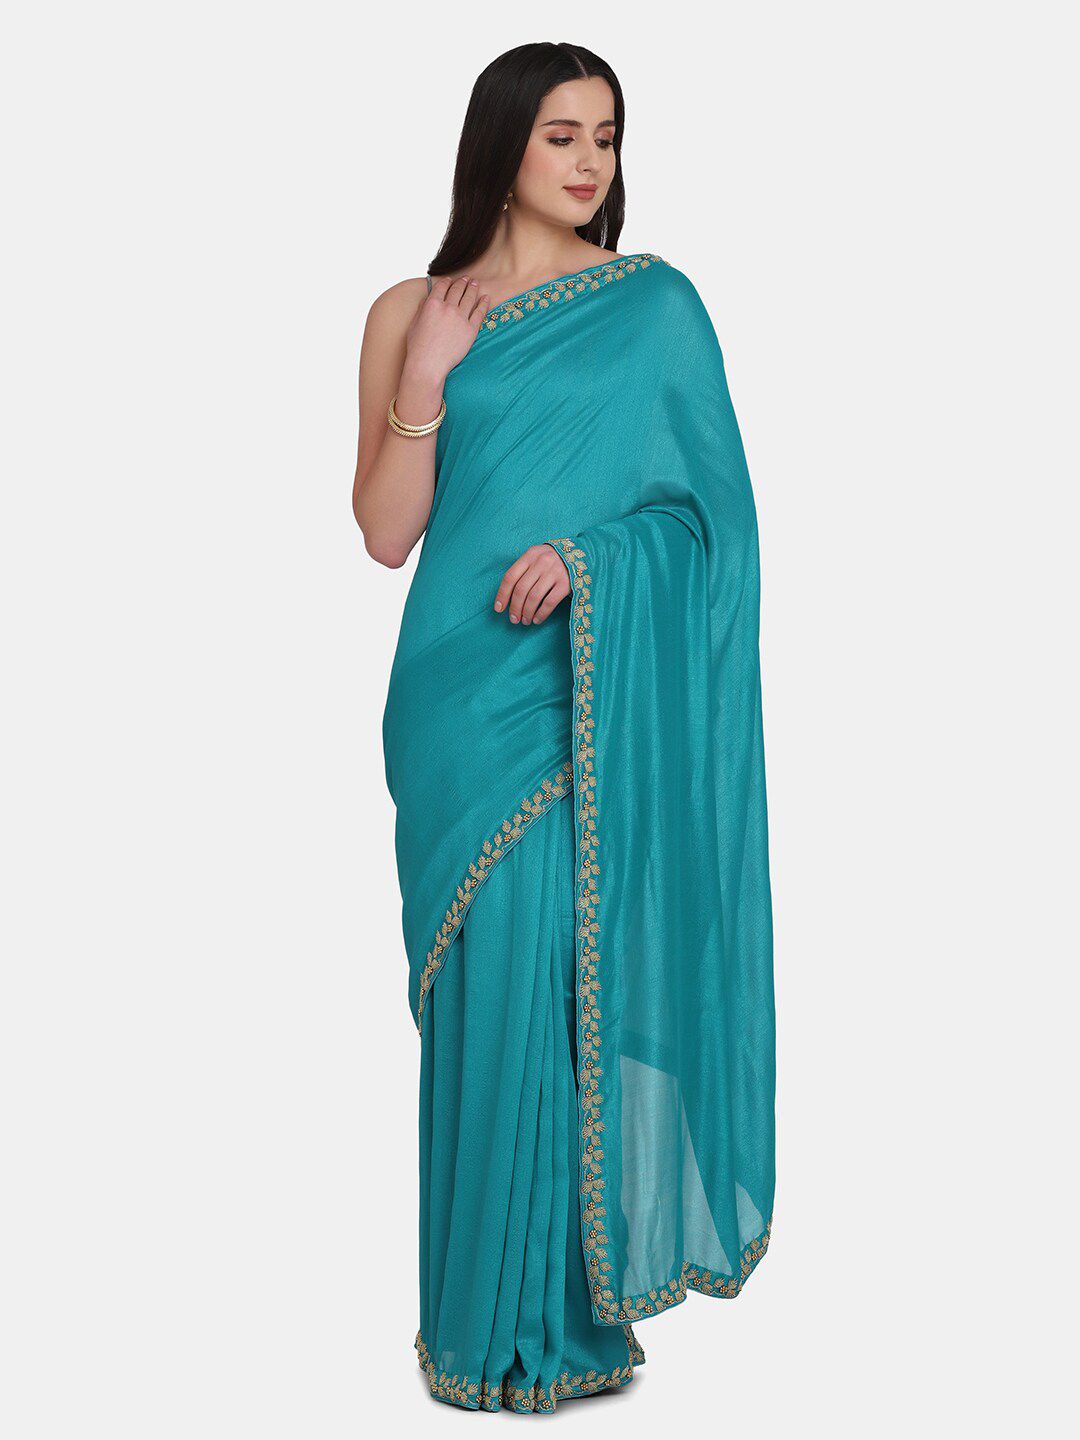 BOMBAY SELECTIONS Green & Gold-Toned Embellished Zardozi Pure Silk Tussar Saree Price in India